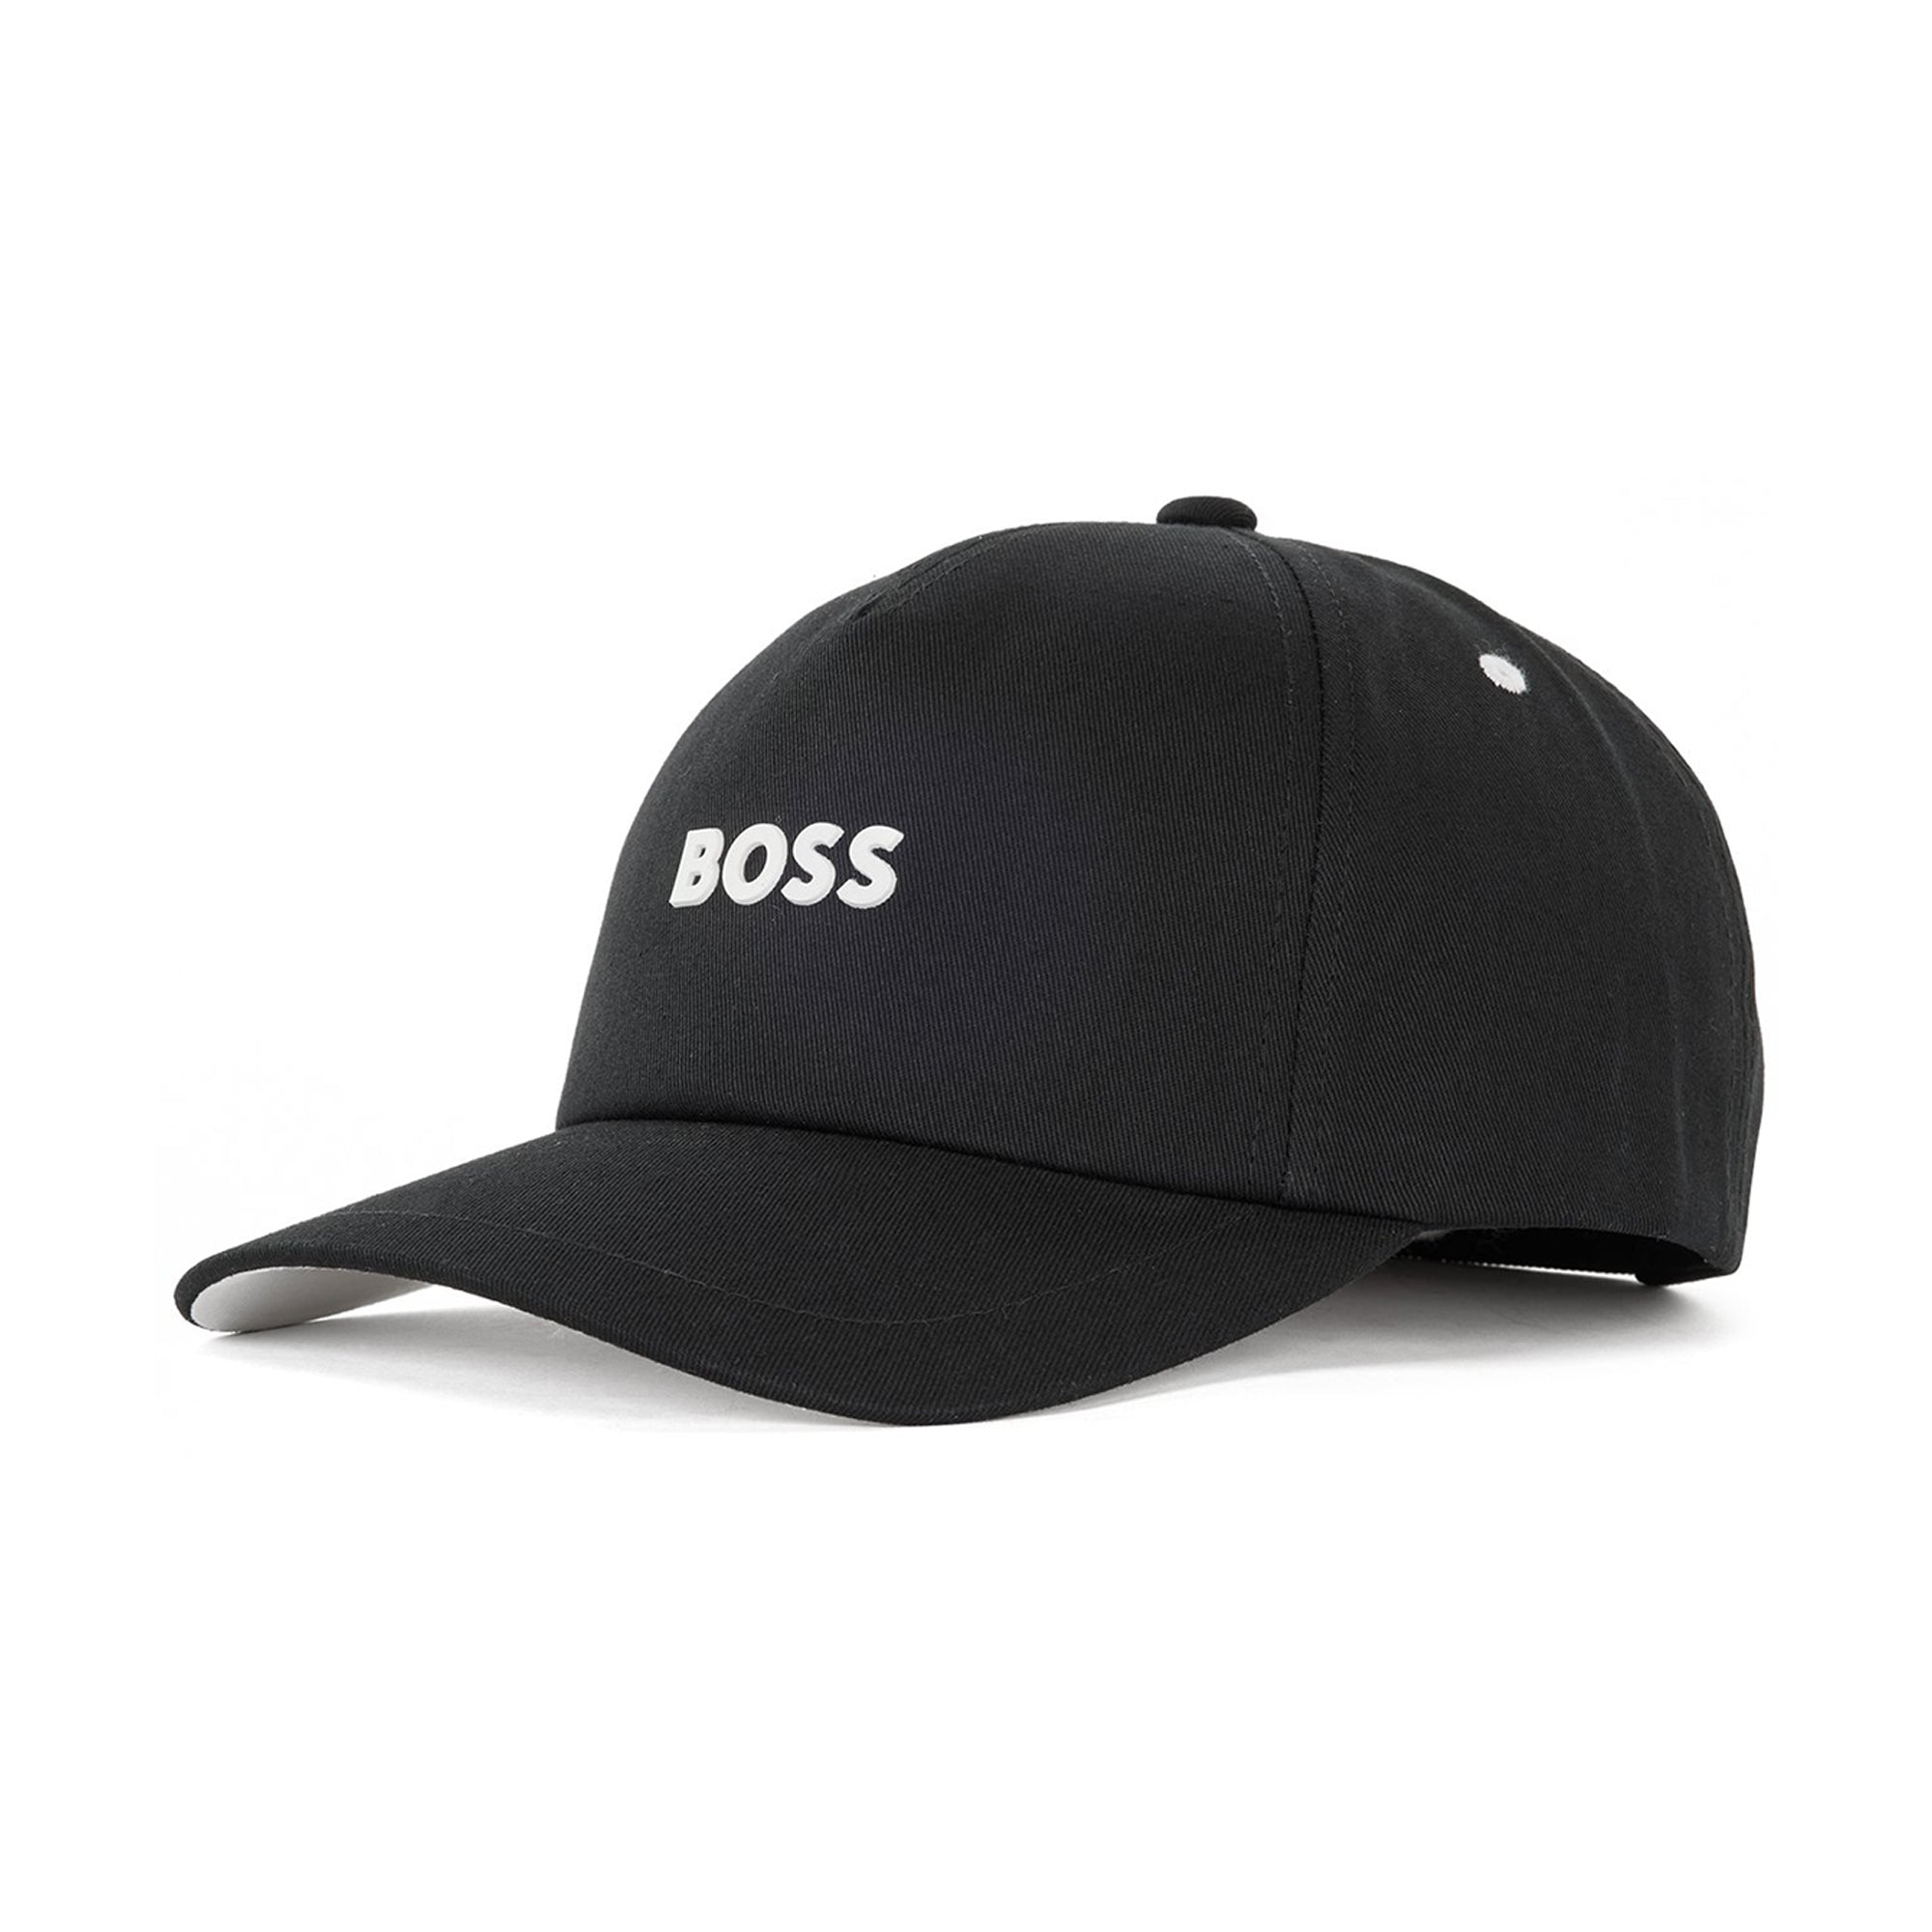 Boss Zed Embroidered Cotton Cap - Beige